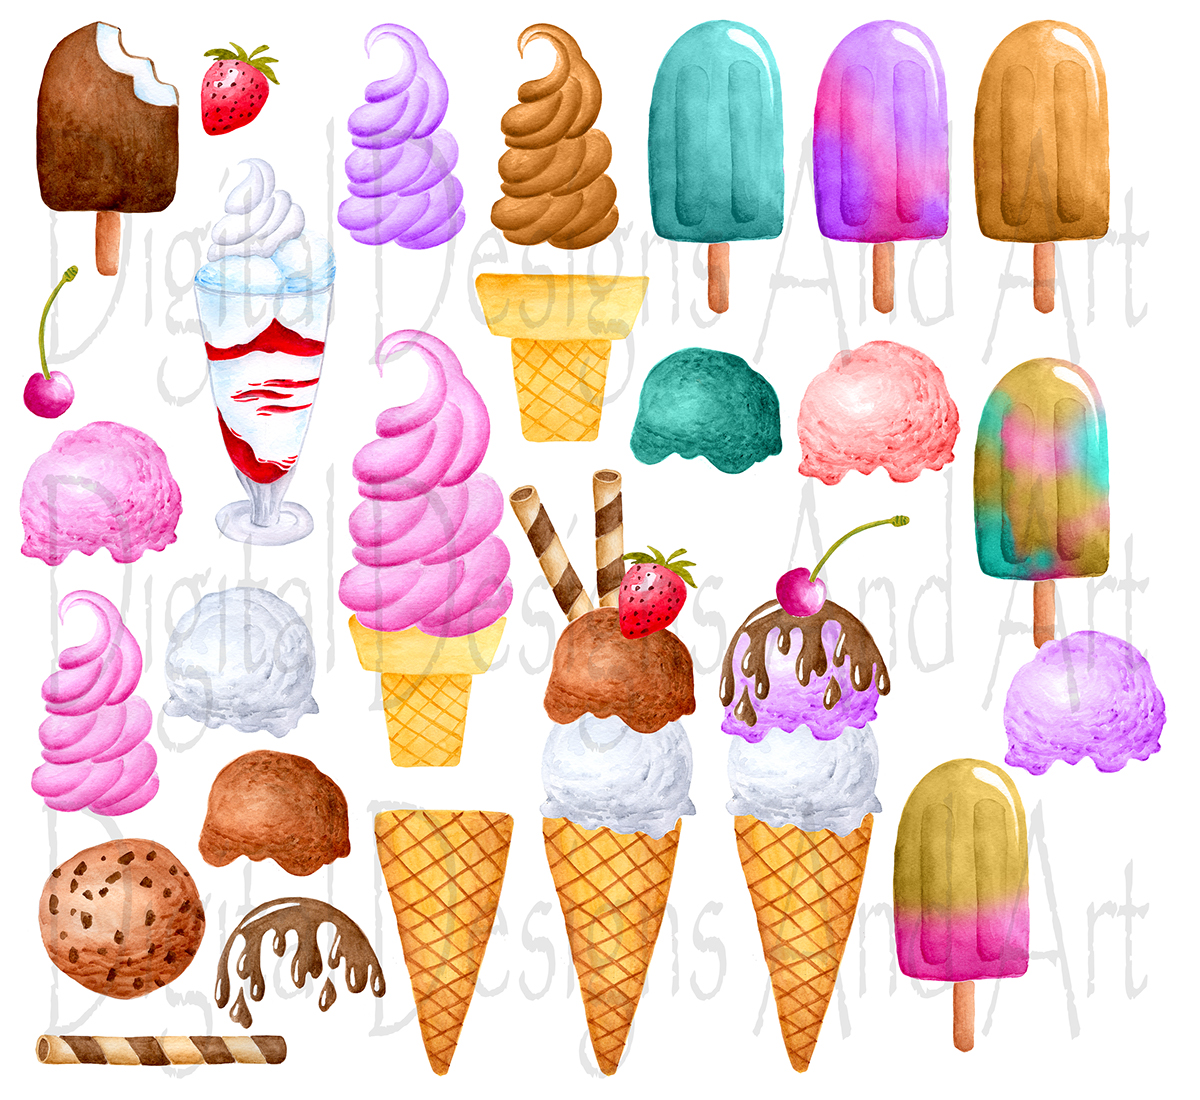 Watercolor clipart Icecream clipart Watercolor Drawing clipart digital pattern